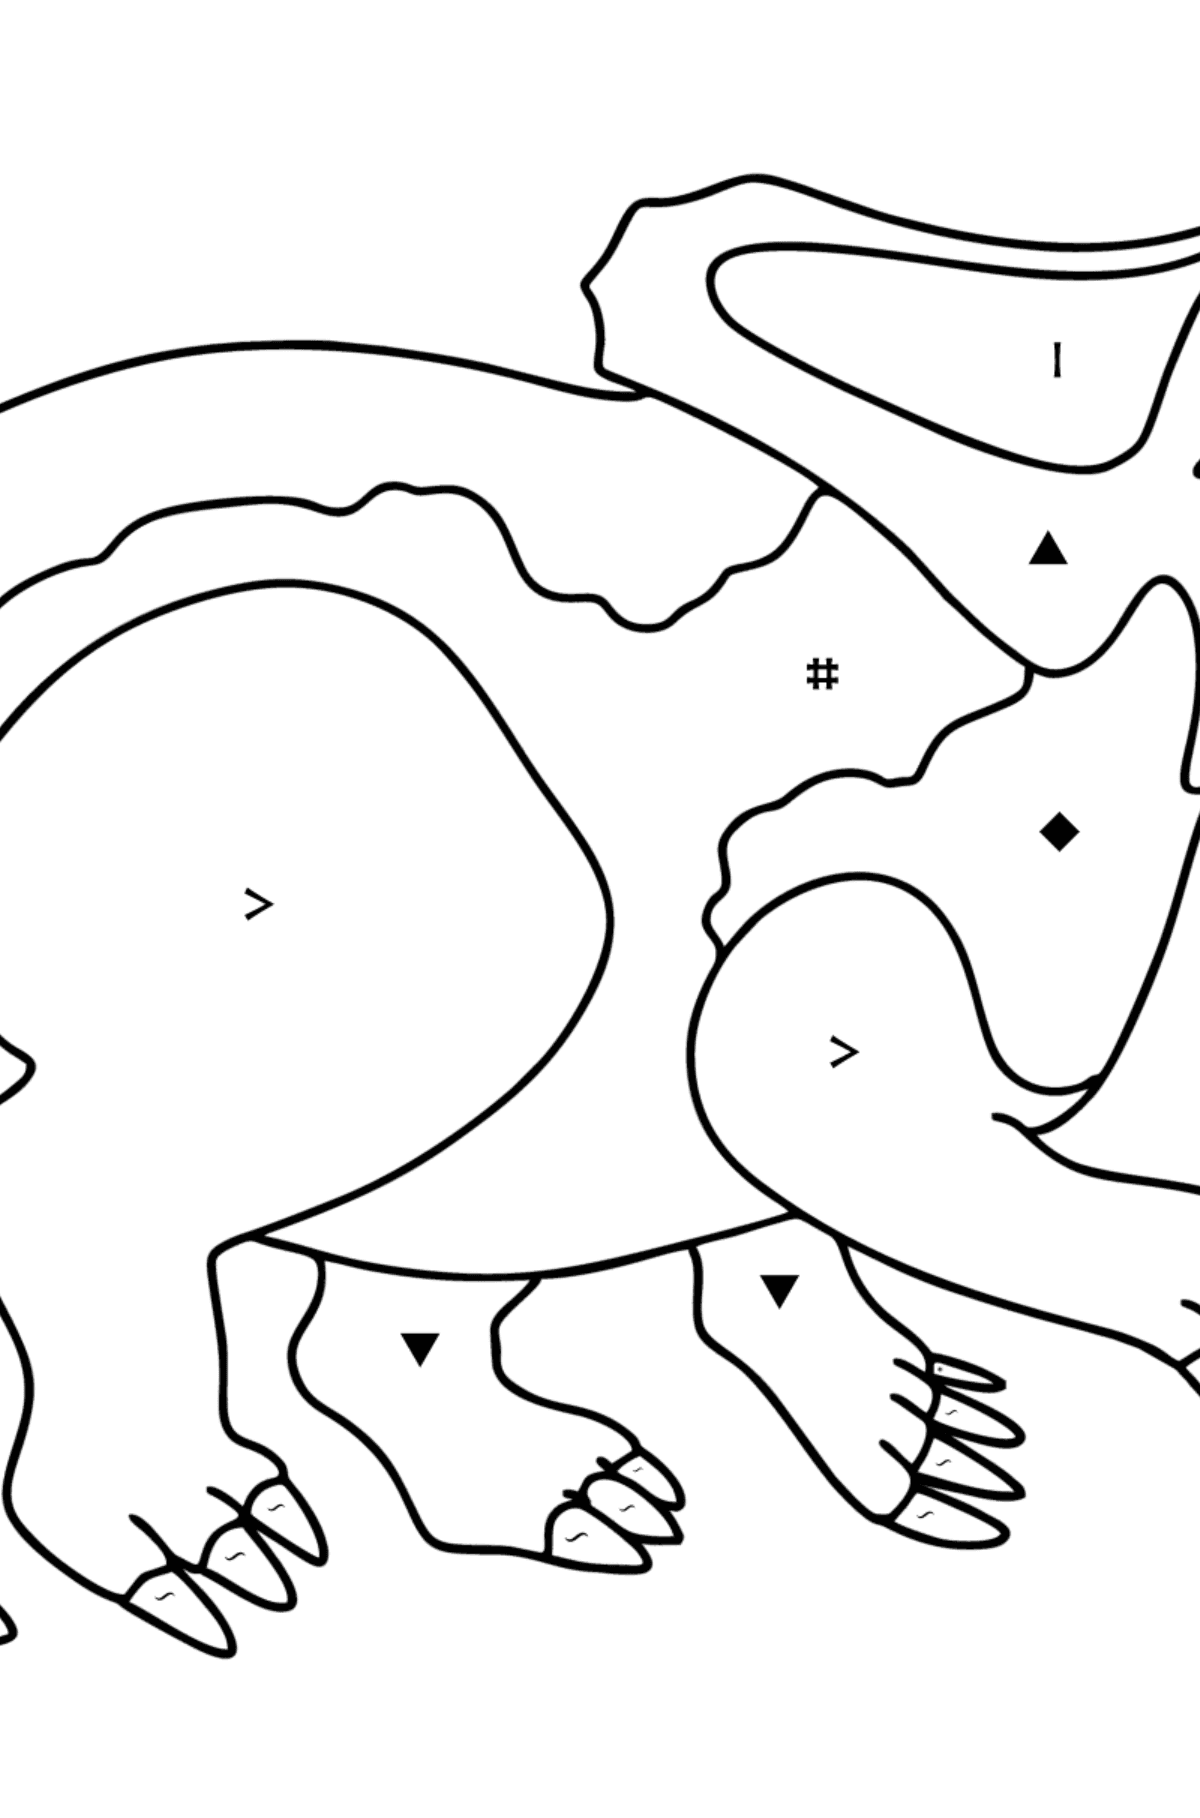 Protoceratops coloring page - Coloring by Symbols for Kids